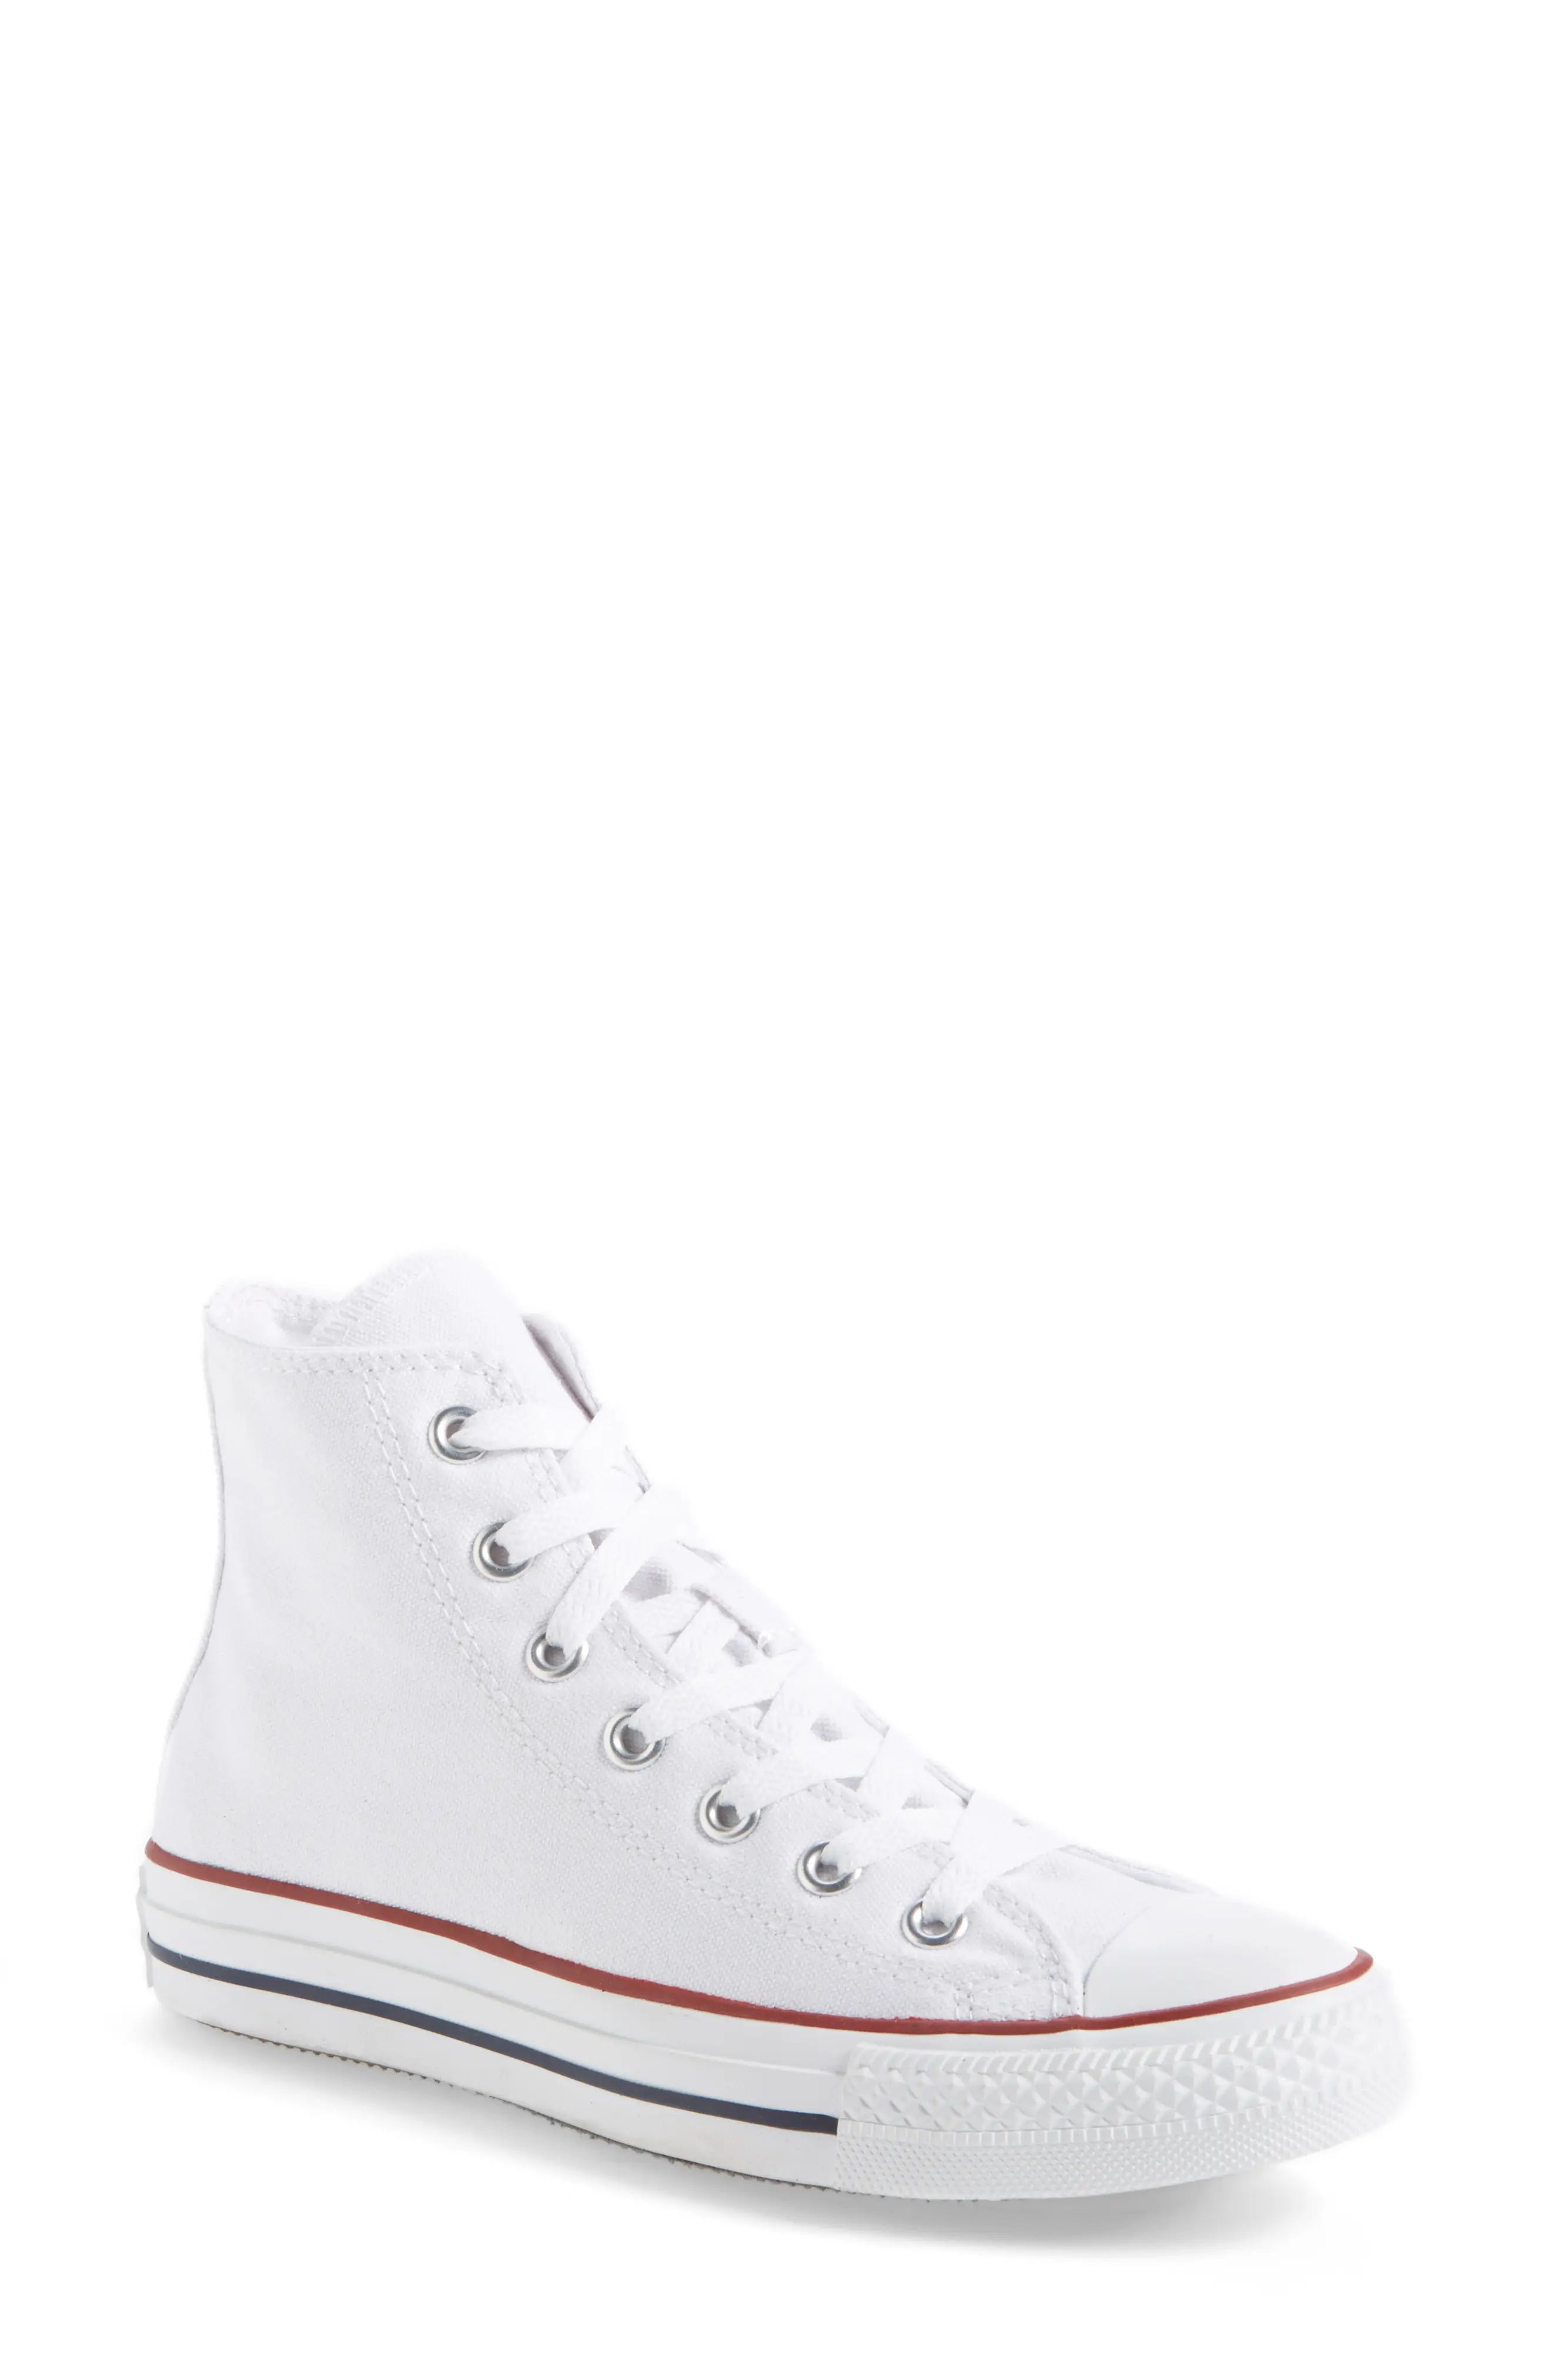 Women's Converse Chuck Taylor High Top Sneaker, Size 5 M - White | Nordstrom